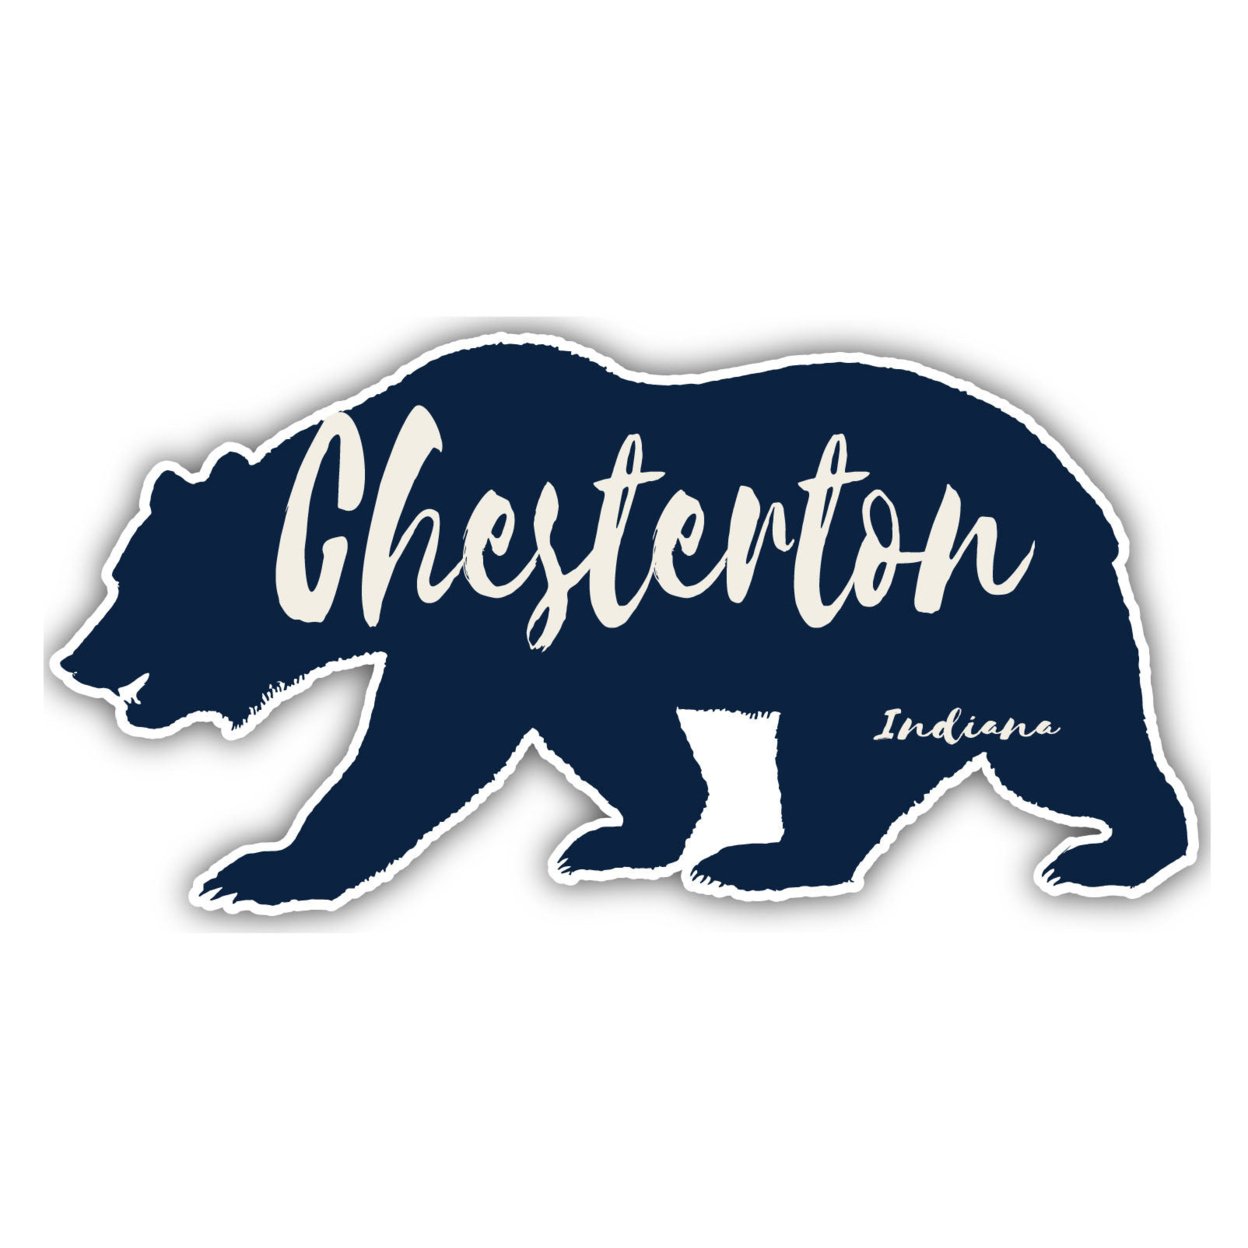 Chesterton Indiana Souvenir Decorative Stickers (Choose Theme And Size) - 4-Pack, 4-Inch, Adventures Awaits